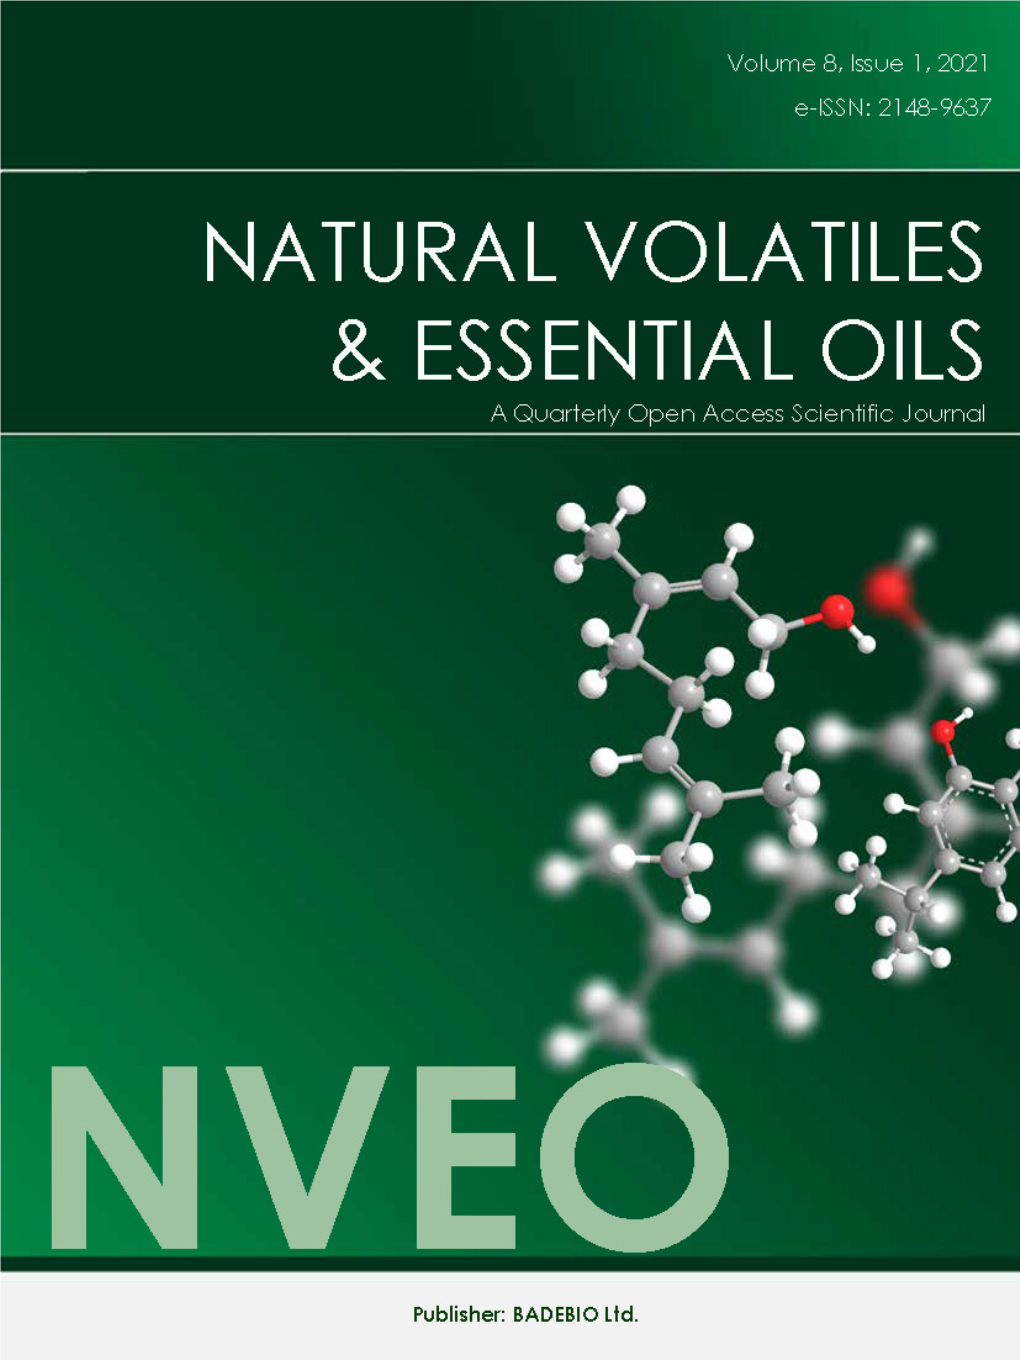 FULL ISSUE: NVEO 2021, Volume 8